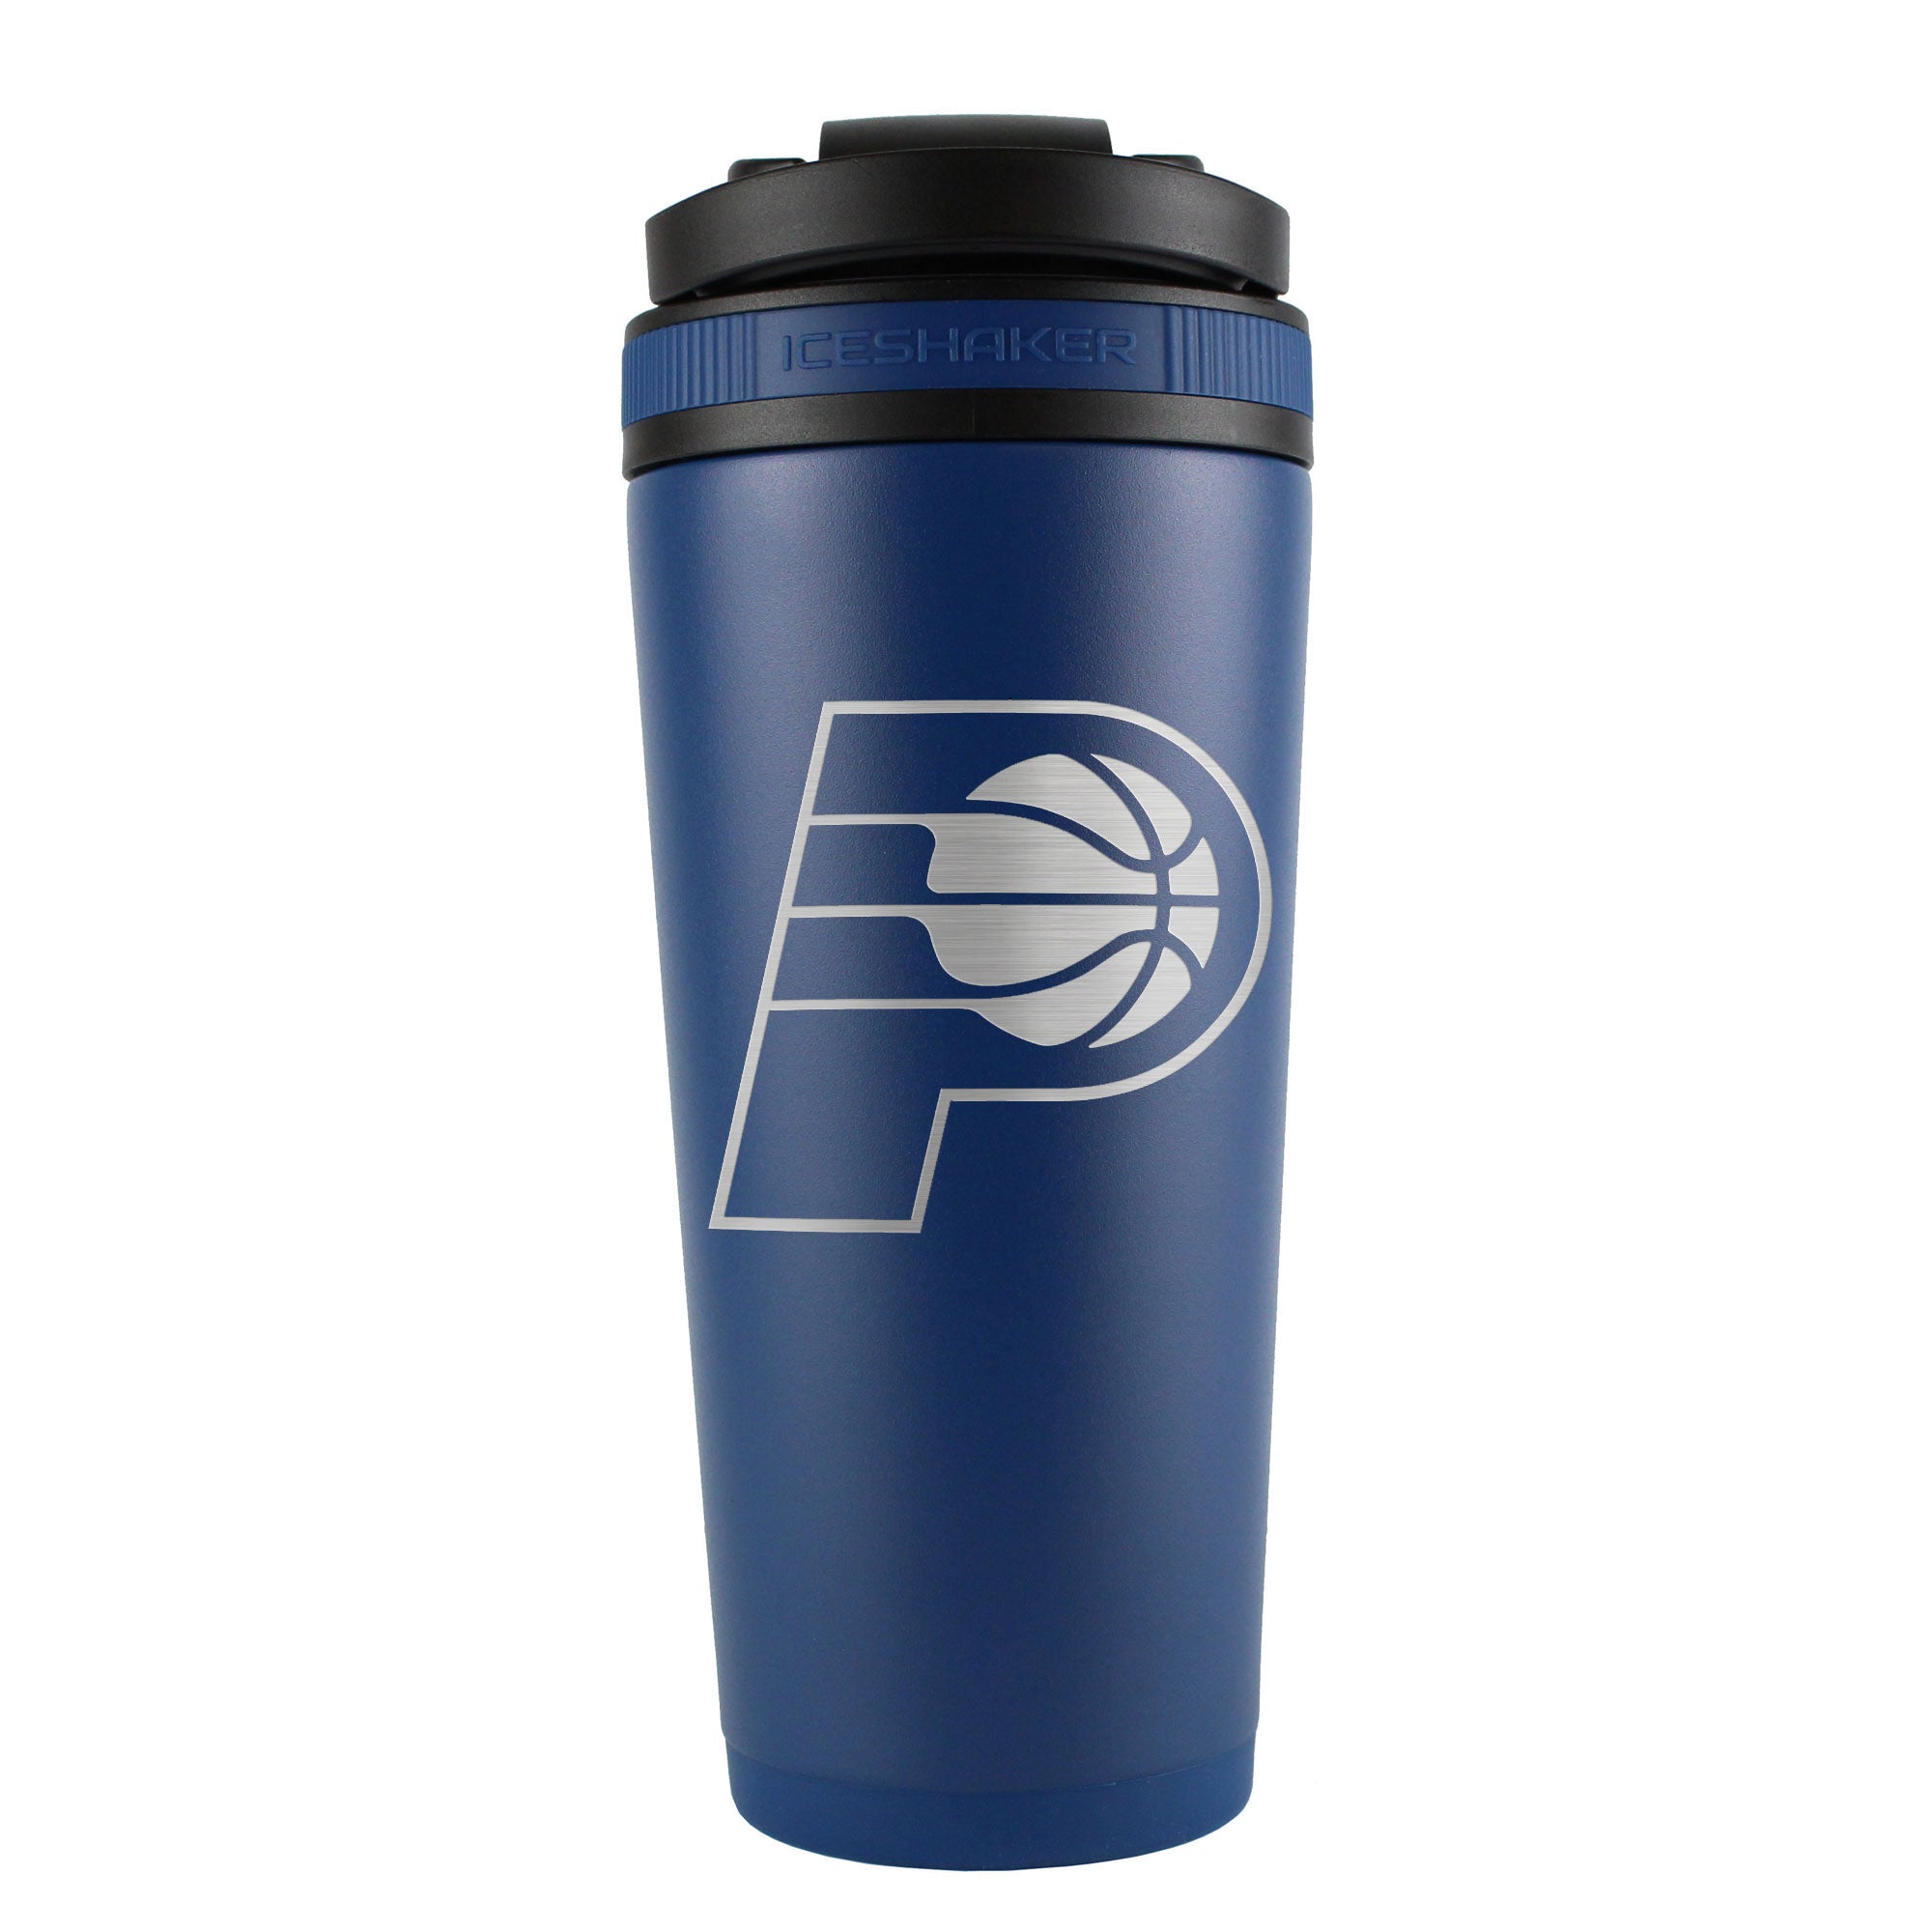 Officially Licensed Indiana Pacers 26oz Ice Shaker - Navy